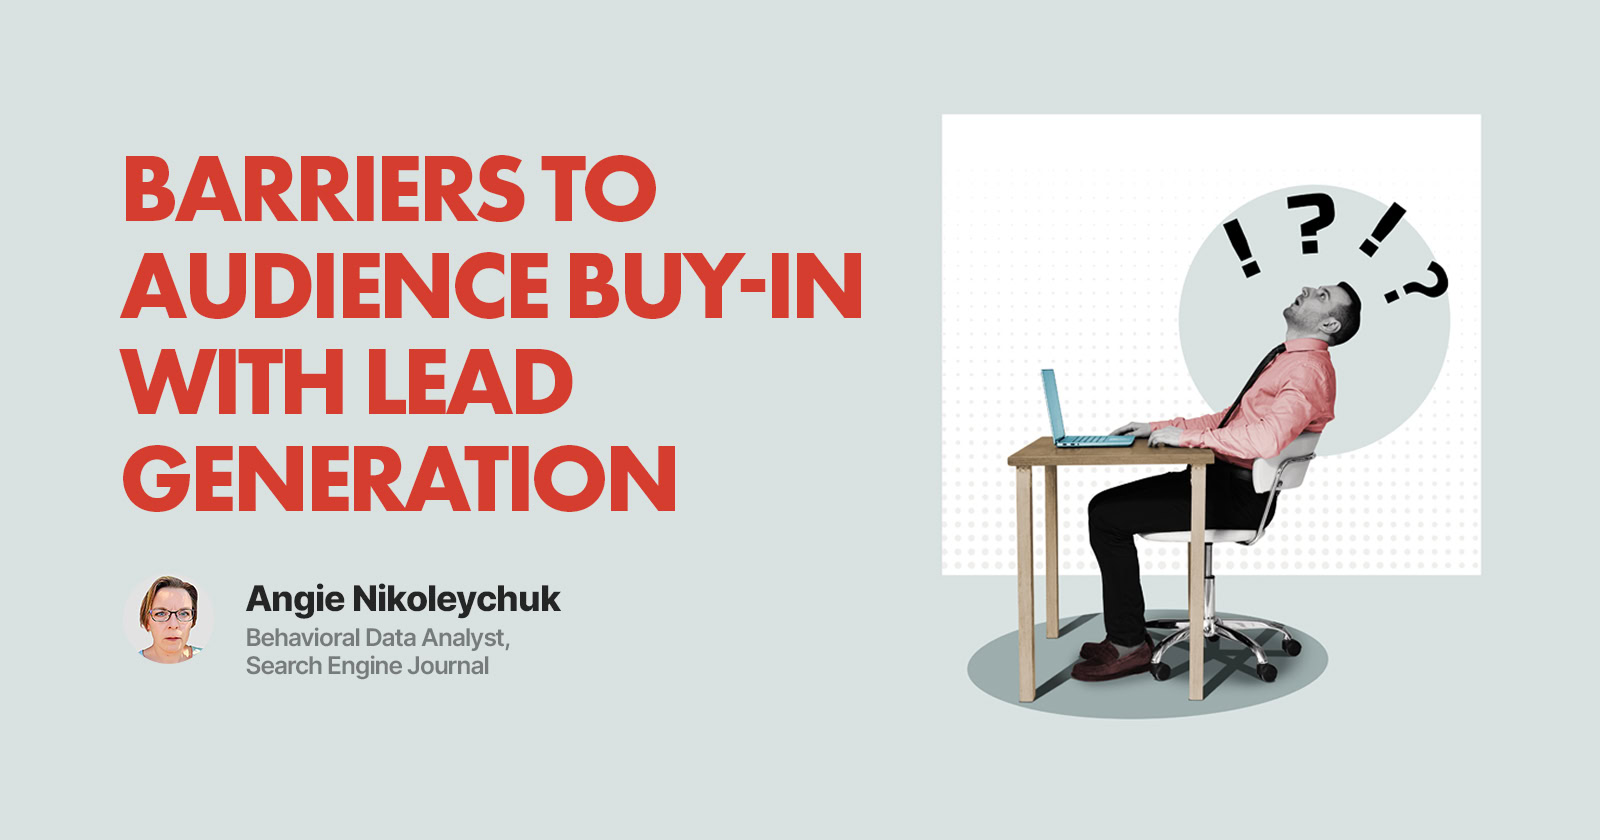 Barriers to audience buy-in with lead generation